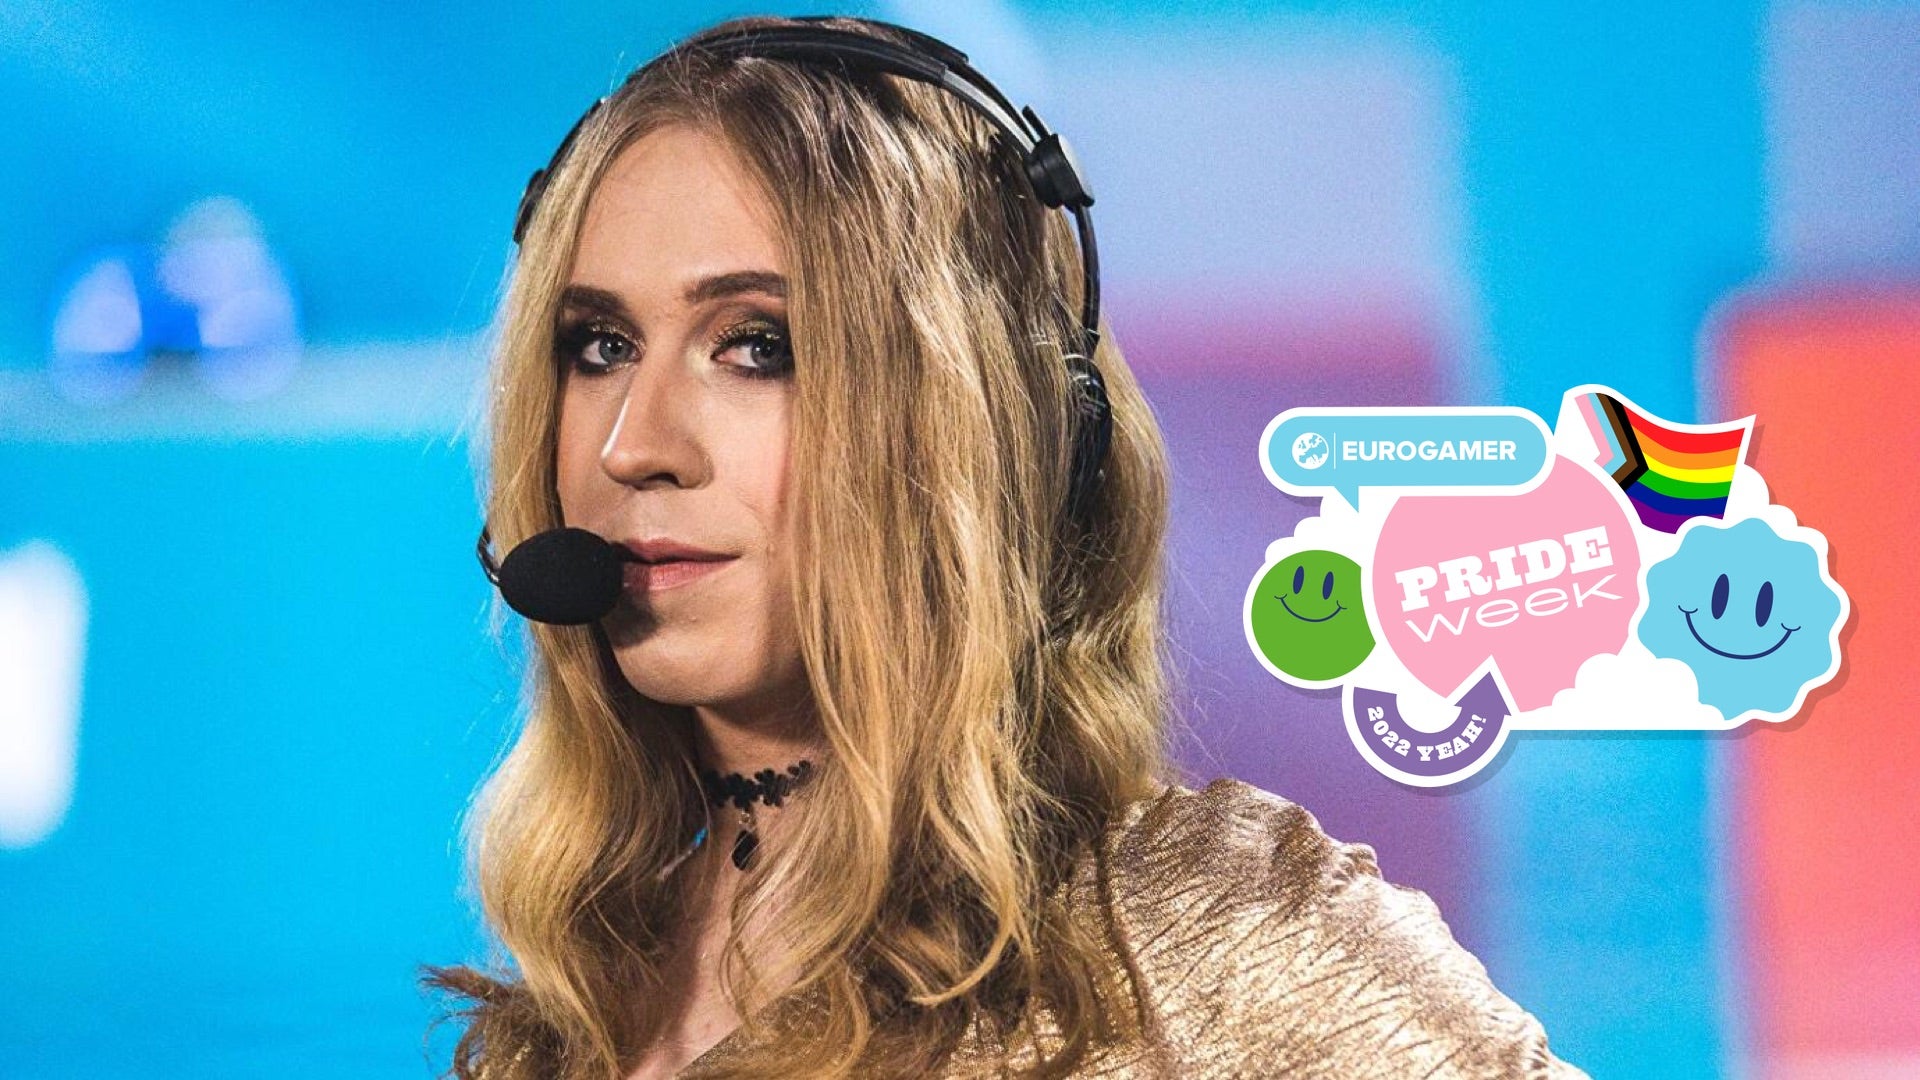 Image for Pride Week: Emi "Captain Fluke" on being the first openly trans esports caster